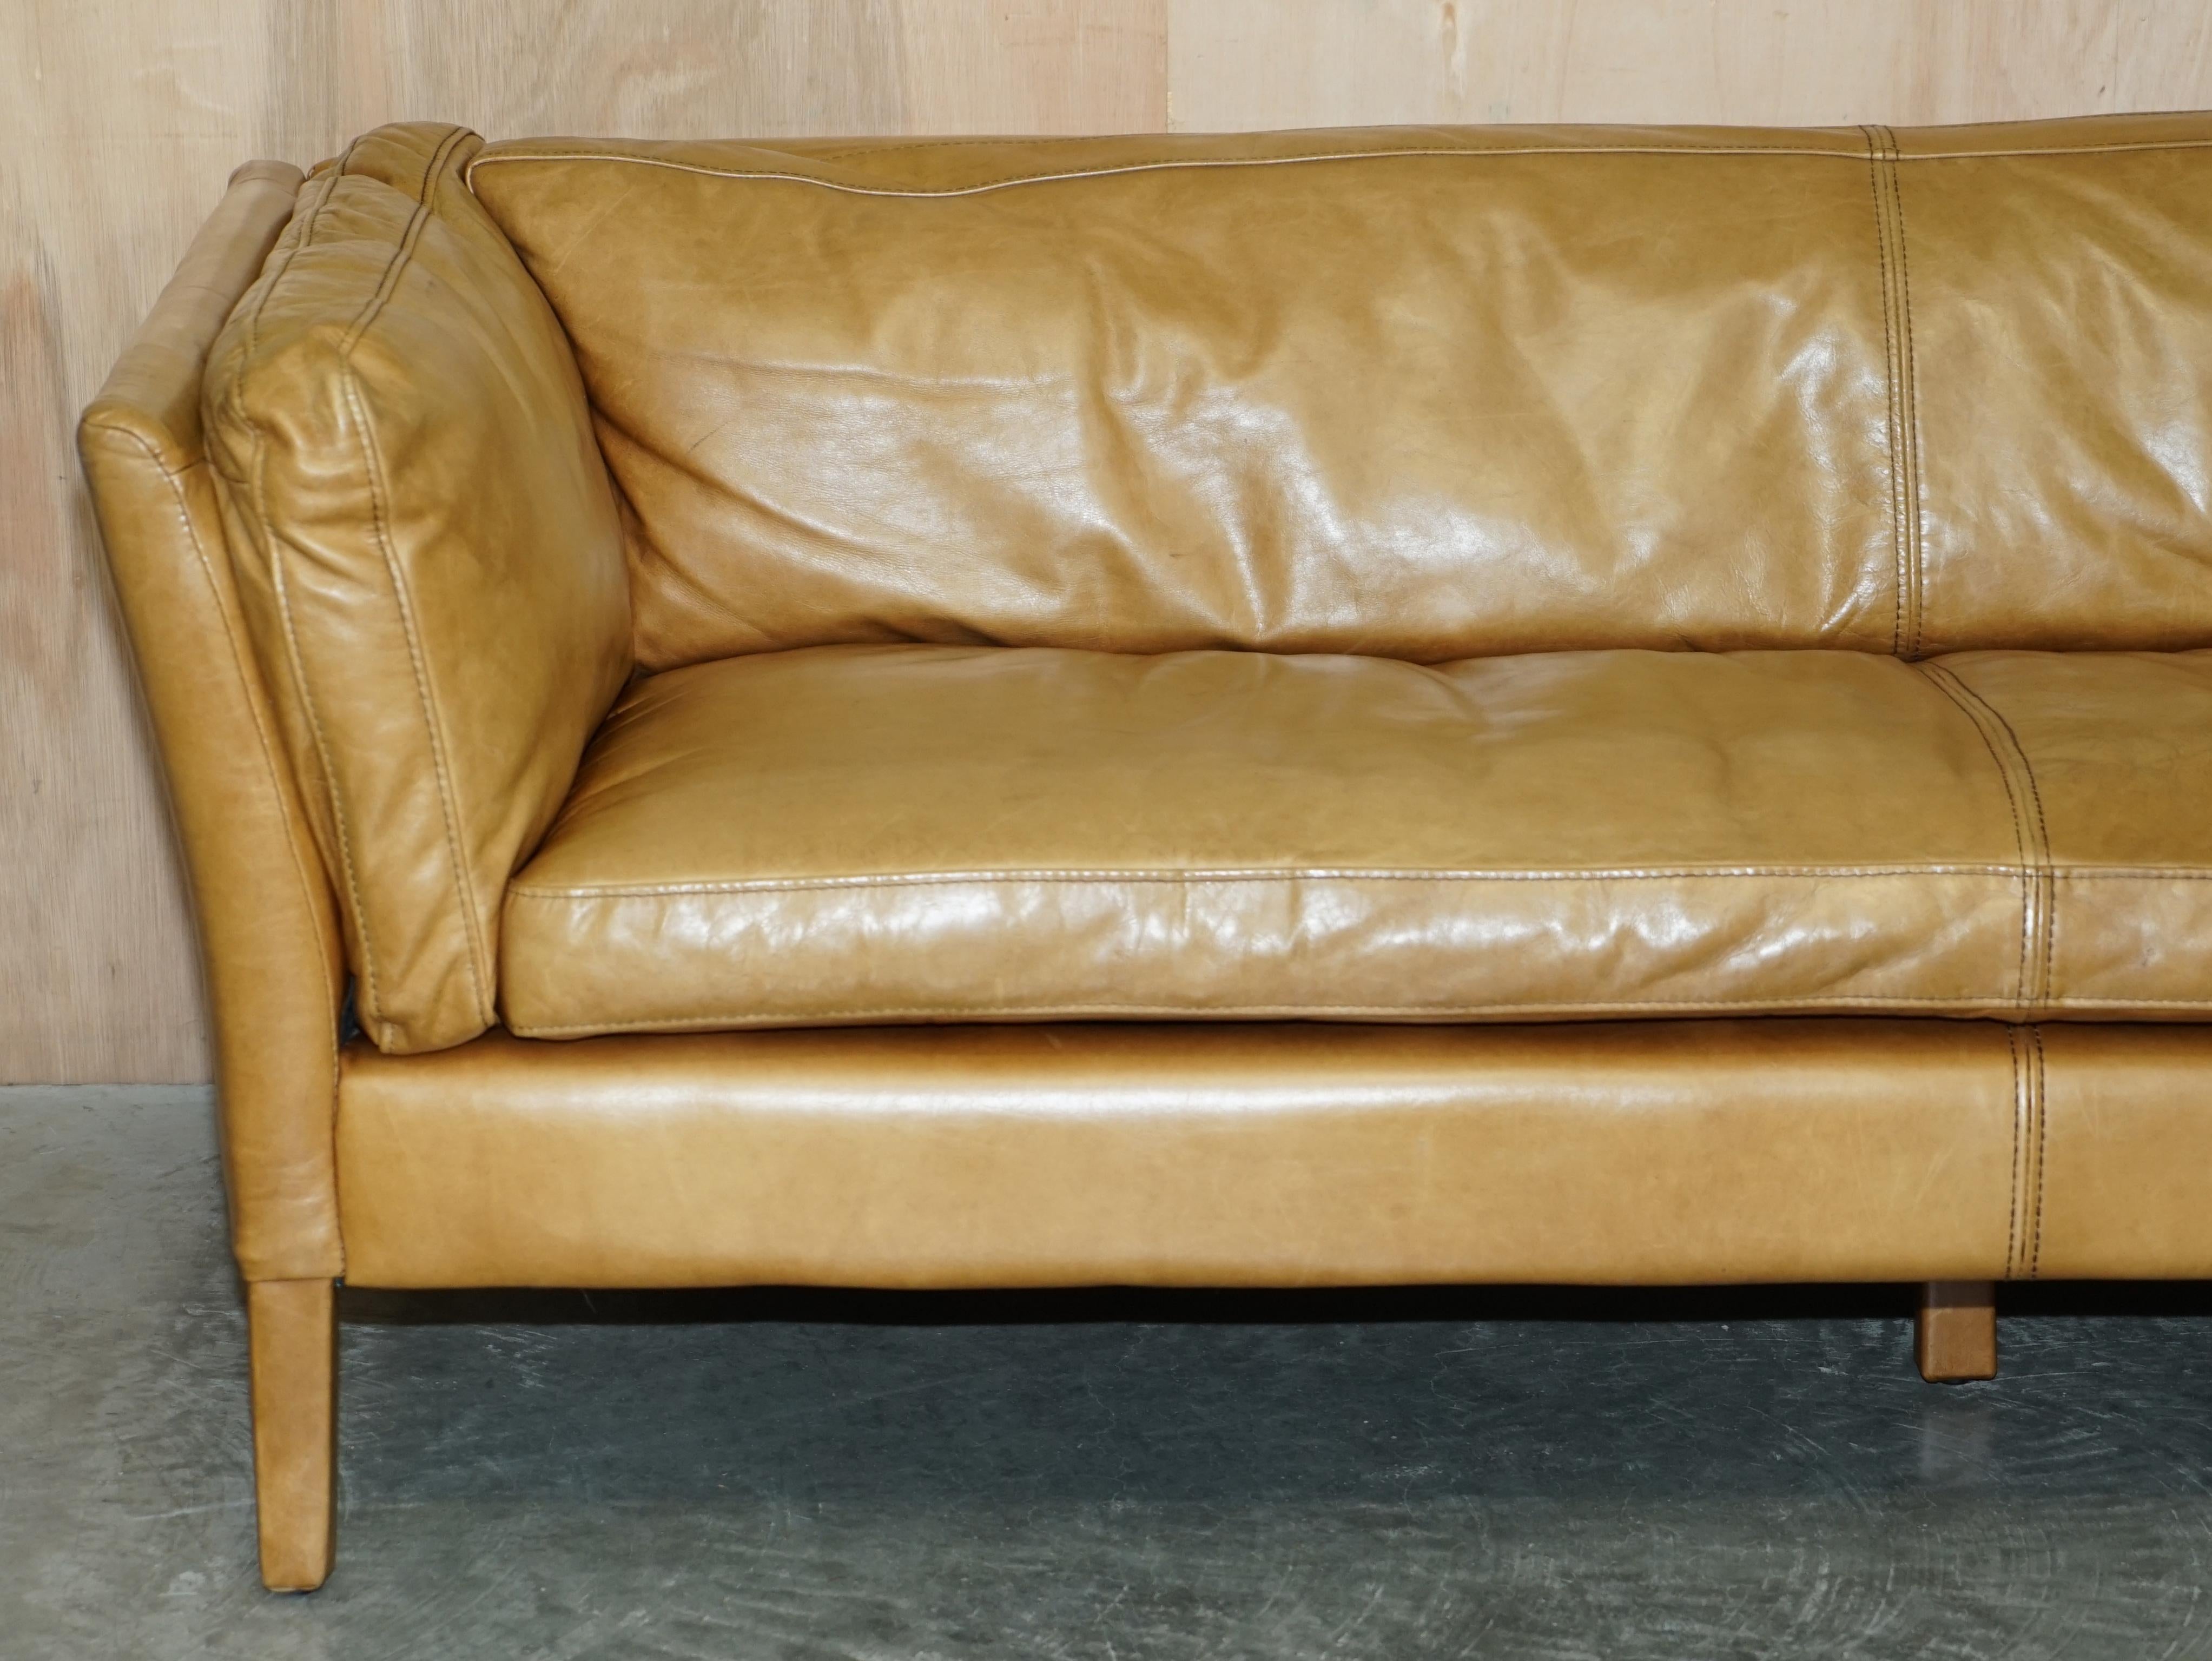 halo groucho sofa review